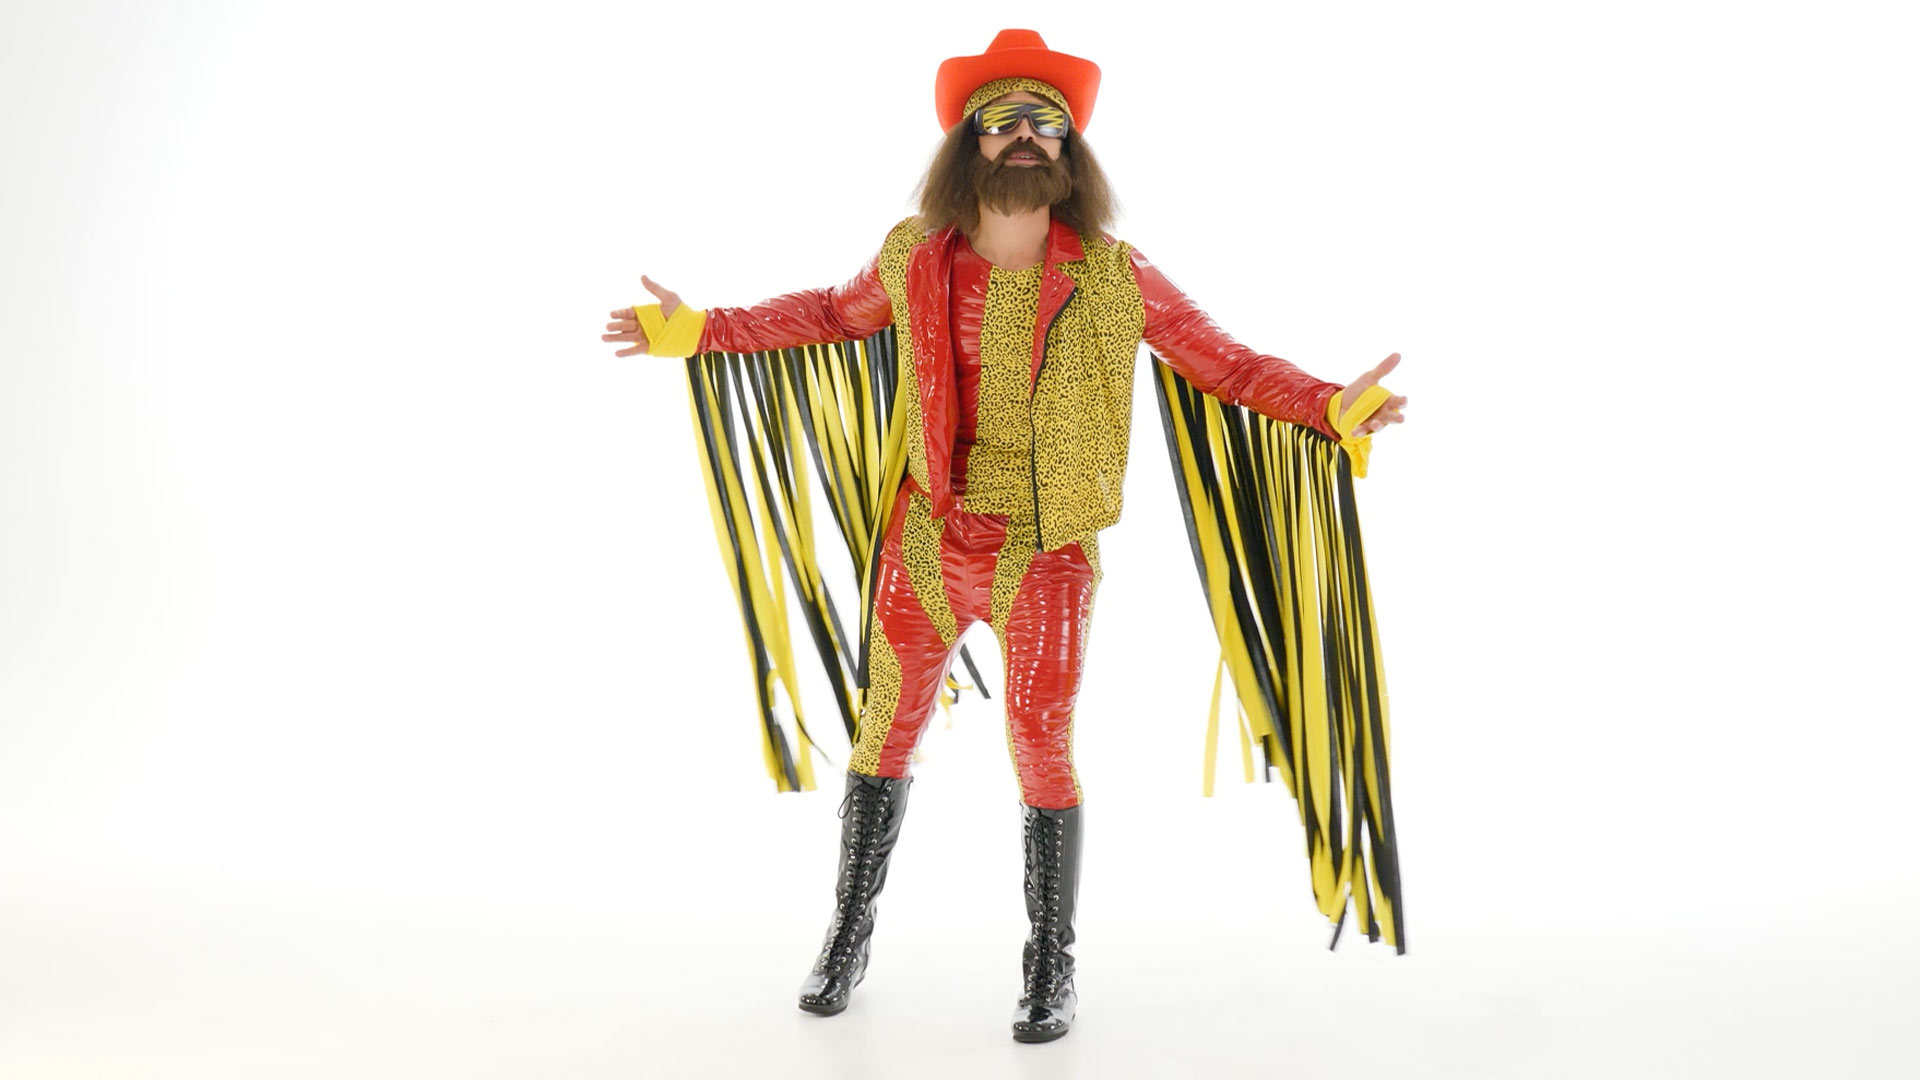 This officially licensed Macho Man Randy Savage costume will transform you into a WWE pro wrestling star.